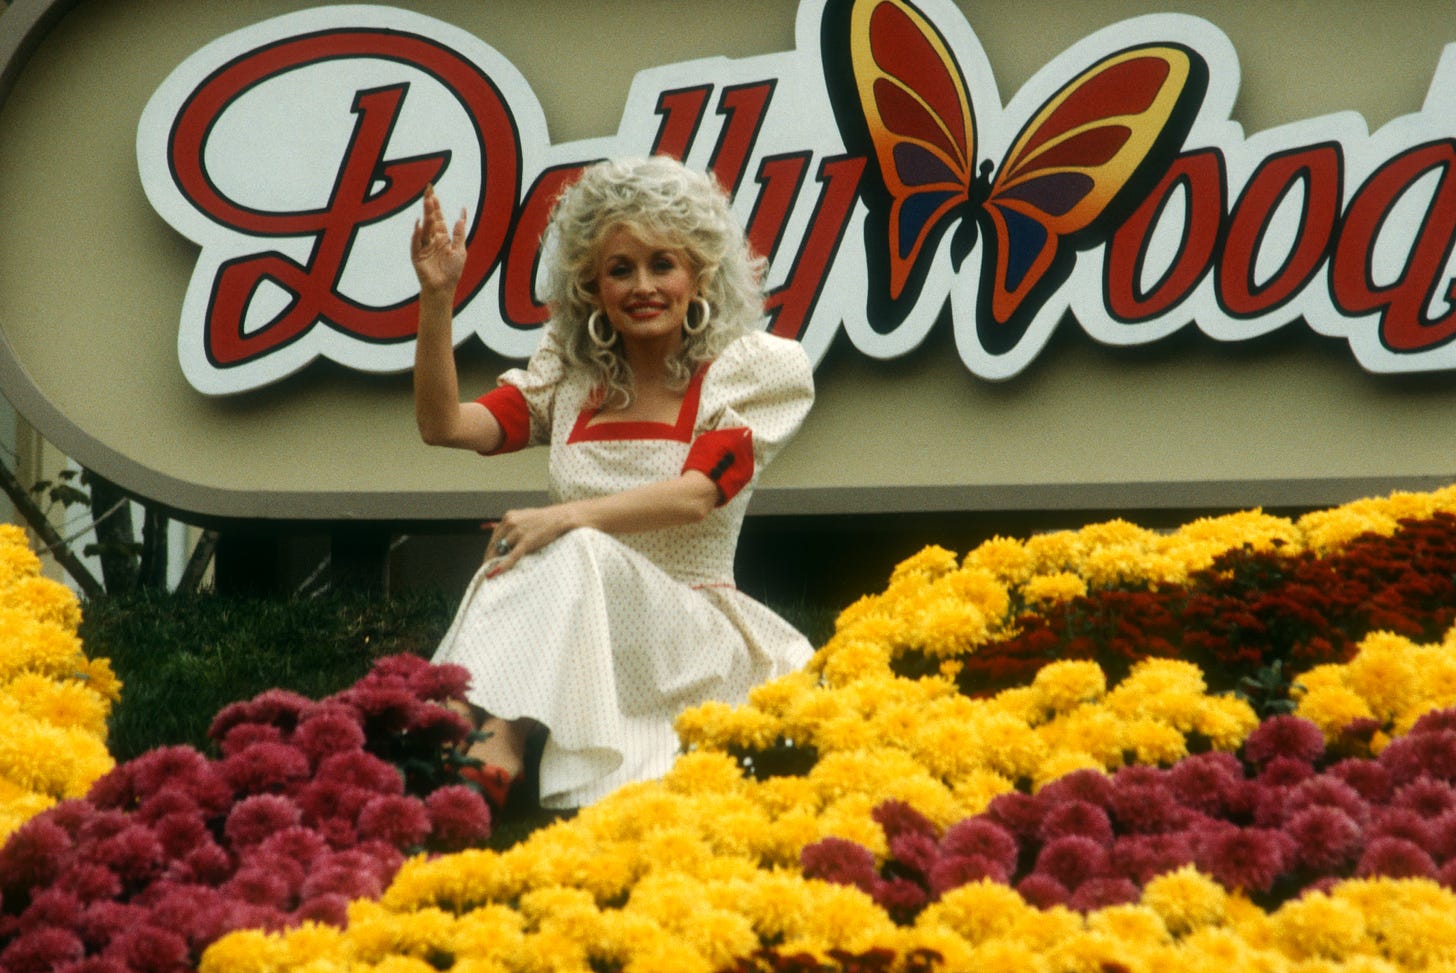 Dolly Parton is sitting among red and yellow flowers waving in front of sign that reads "Dollywood"